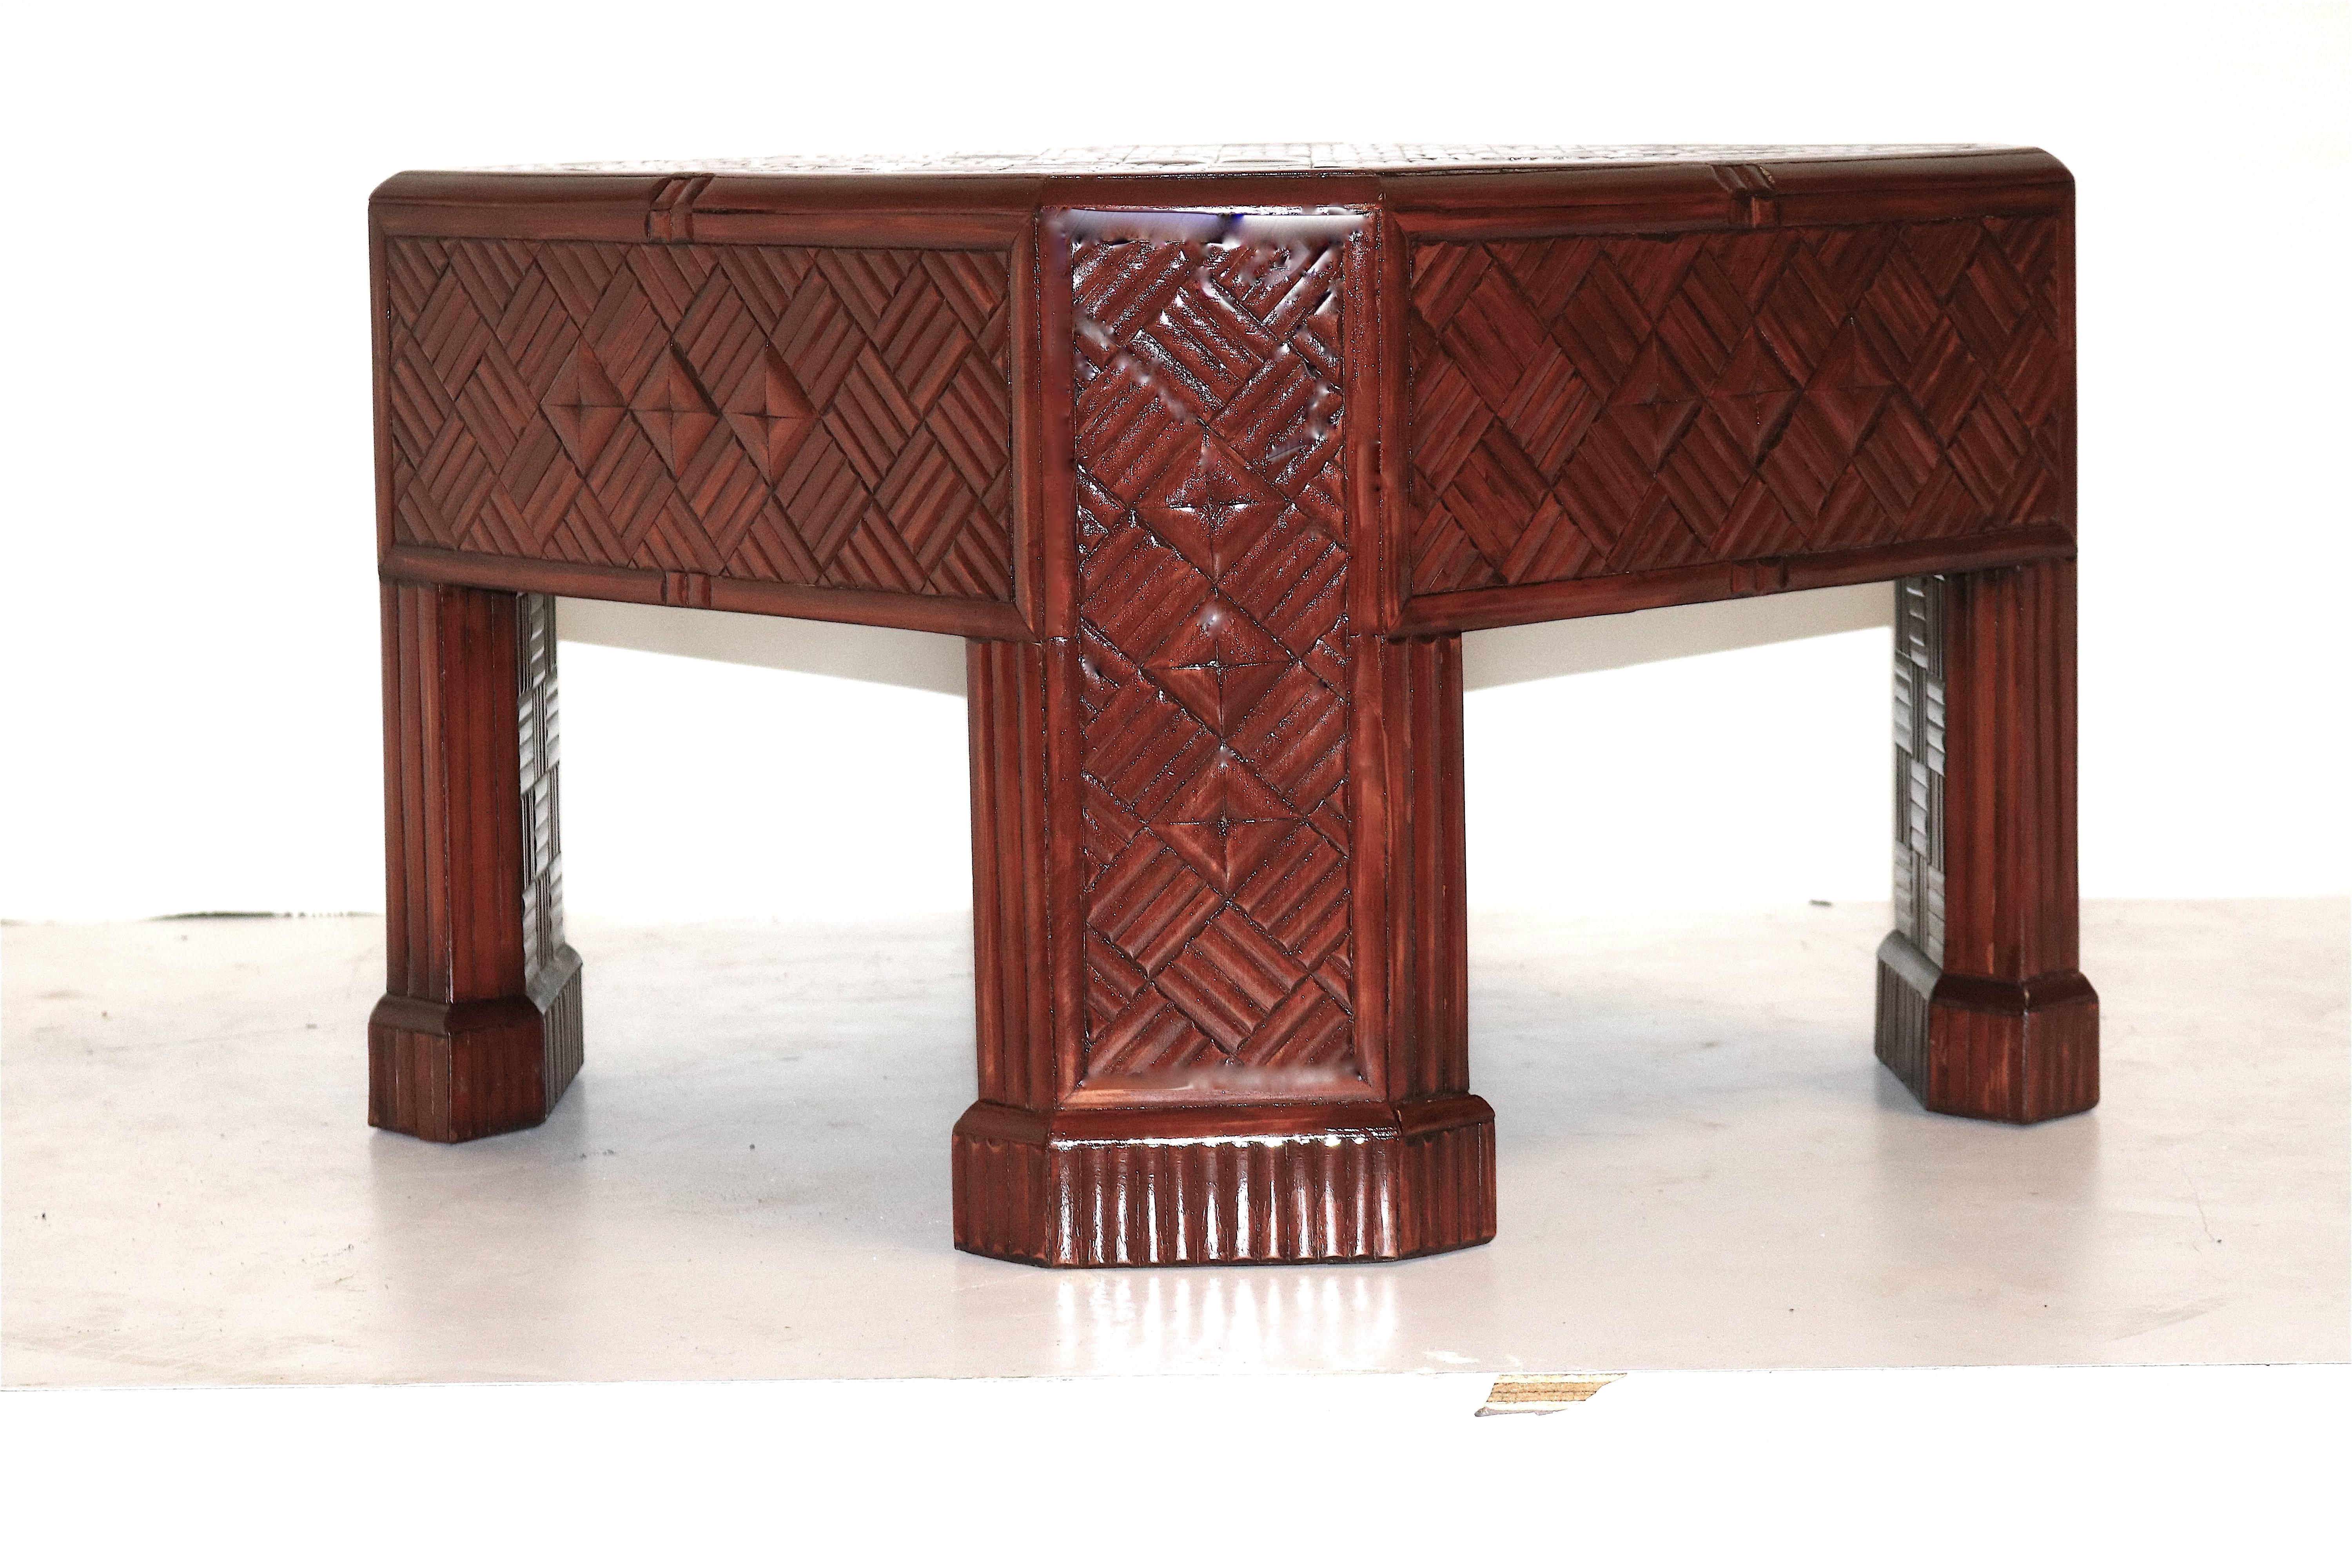 20th Century Bamboo Cocktail Table Diagonal Parquetry Inlay Pattern For Sale